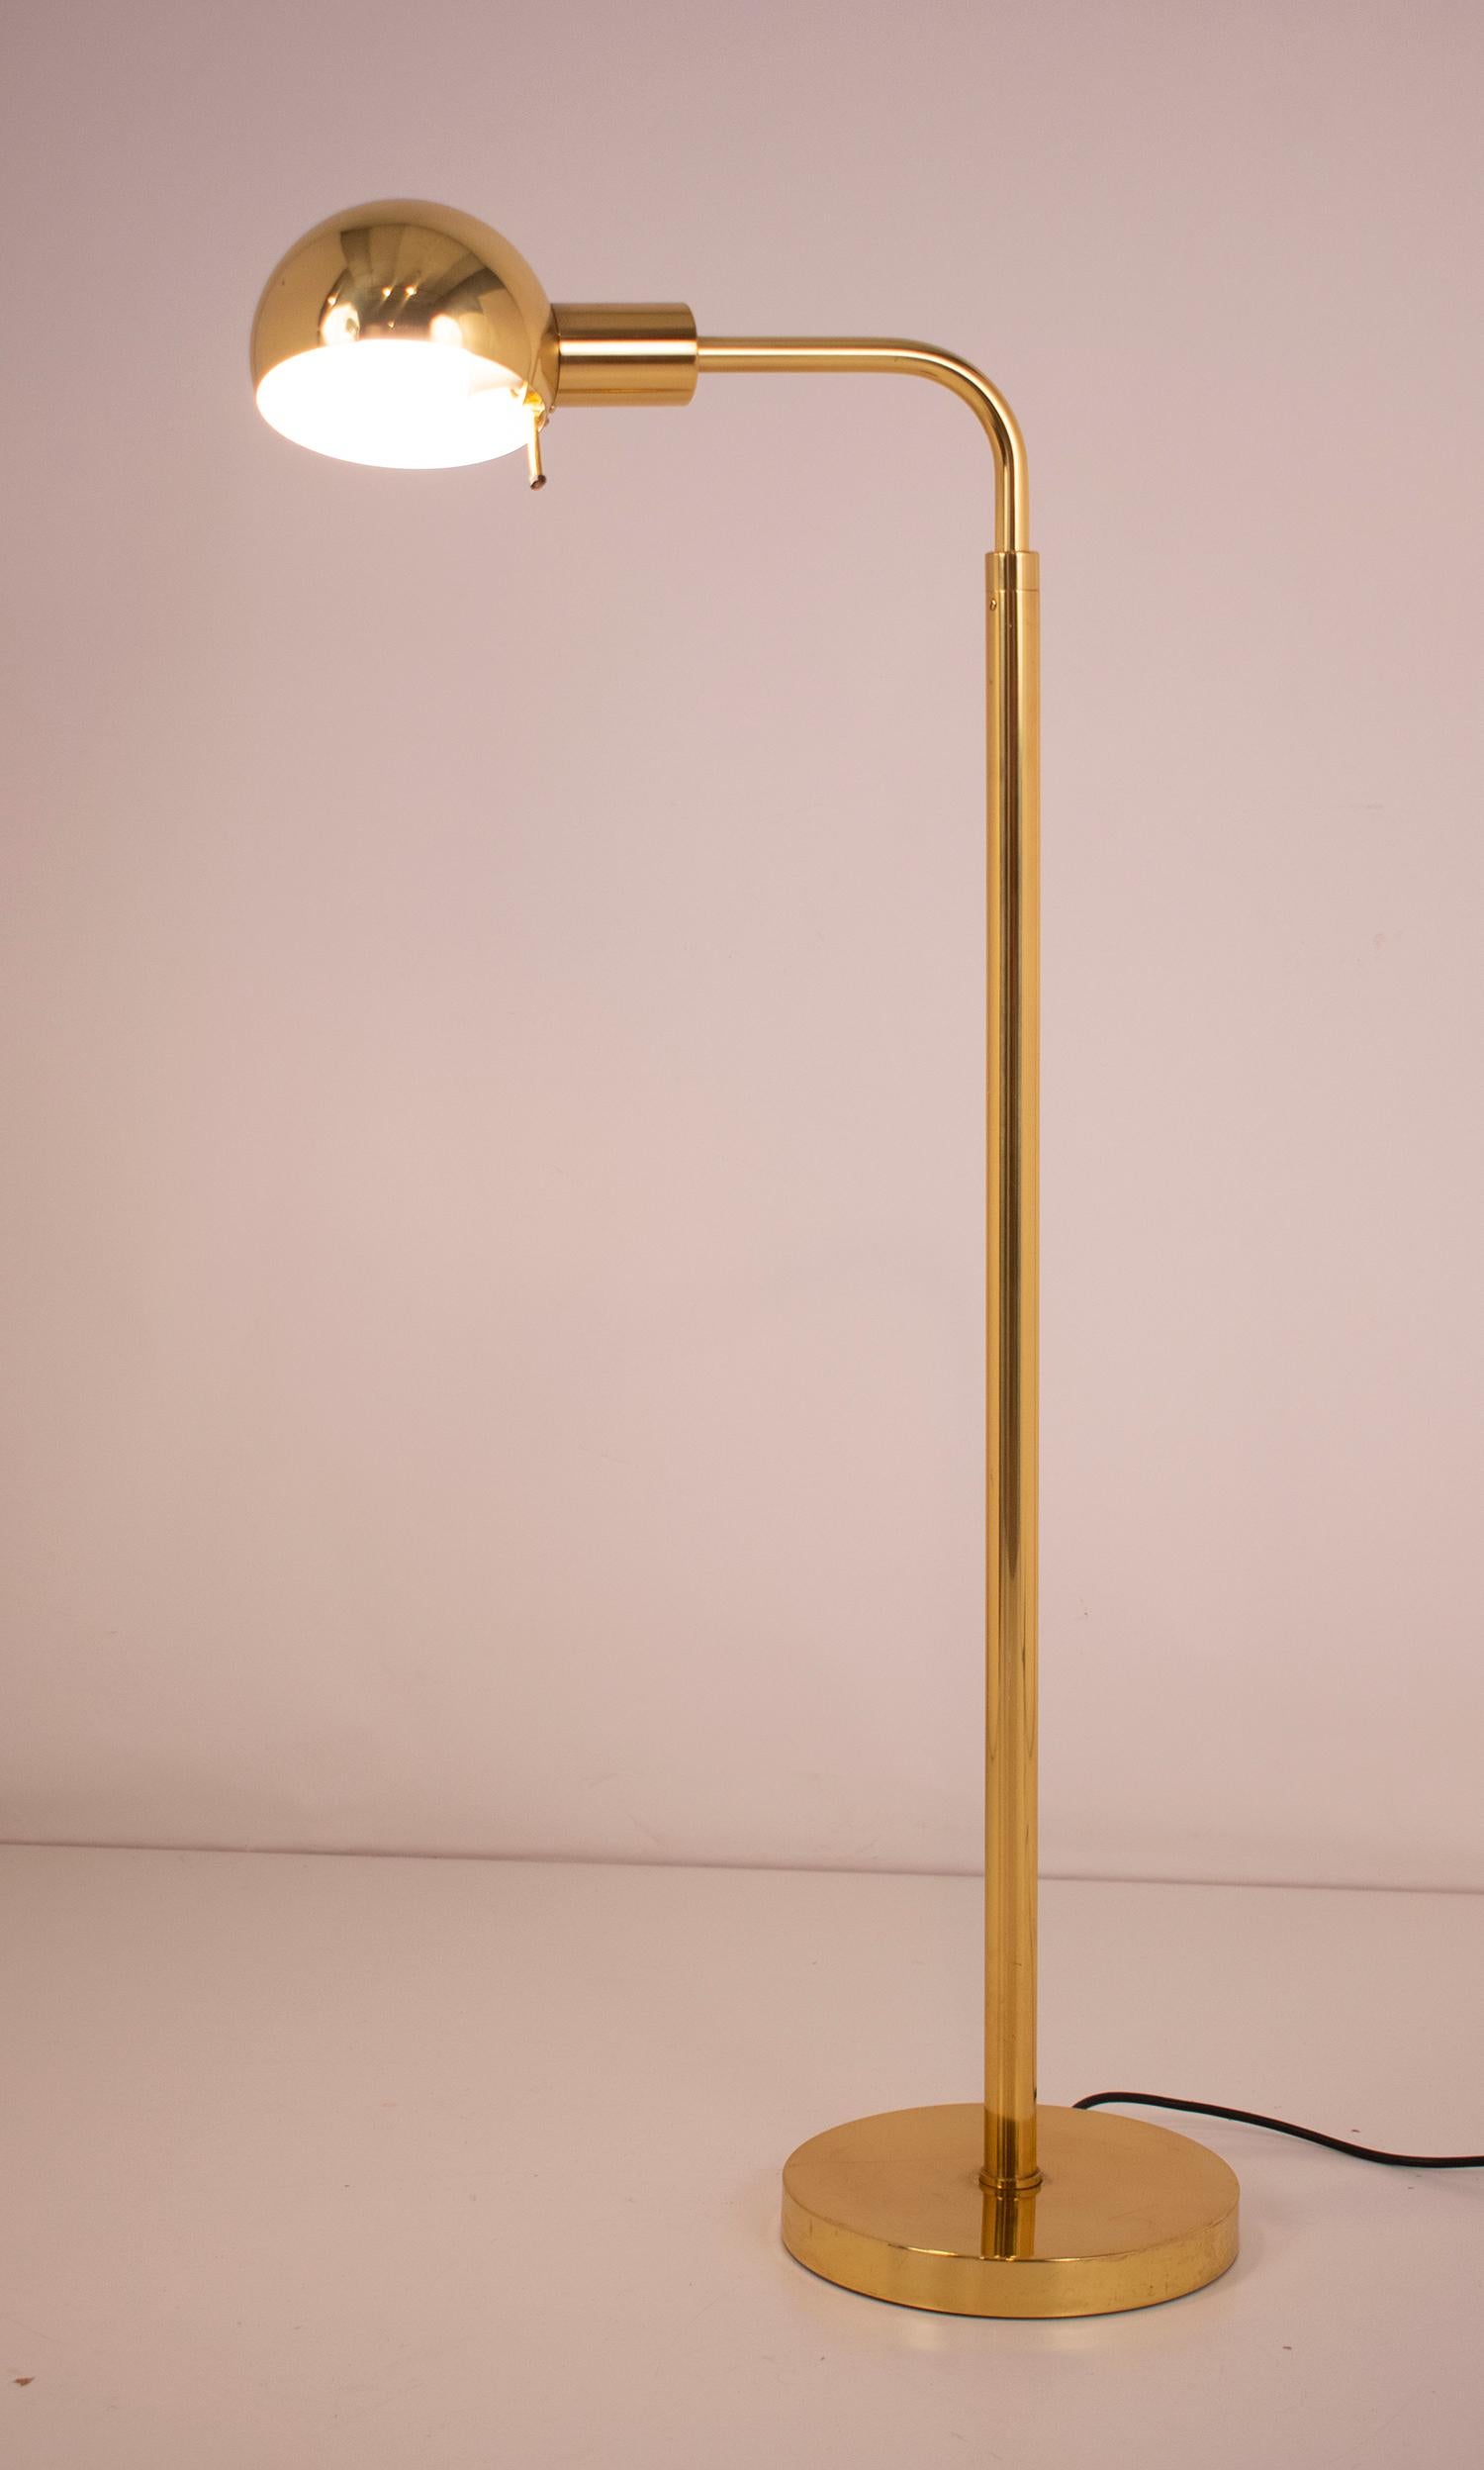 Adjustable floor reading lamp, brass, by. Metalarte for Hansen, Spain, 1960s
The maximum height is 140cm and the minimum height is 110cm.
  